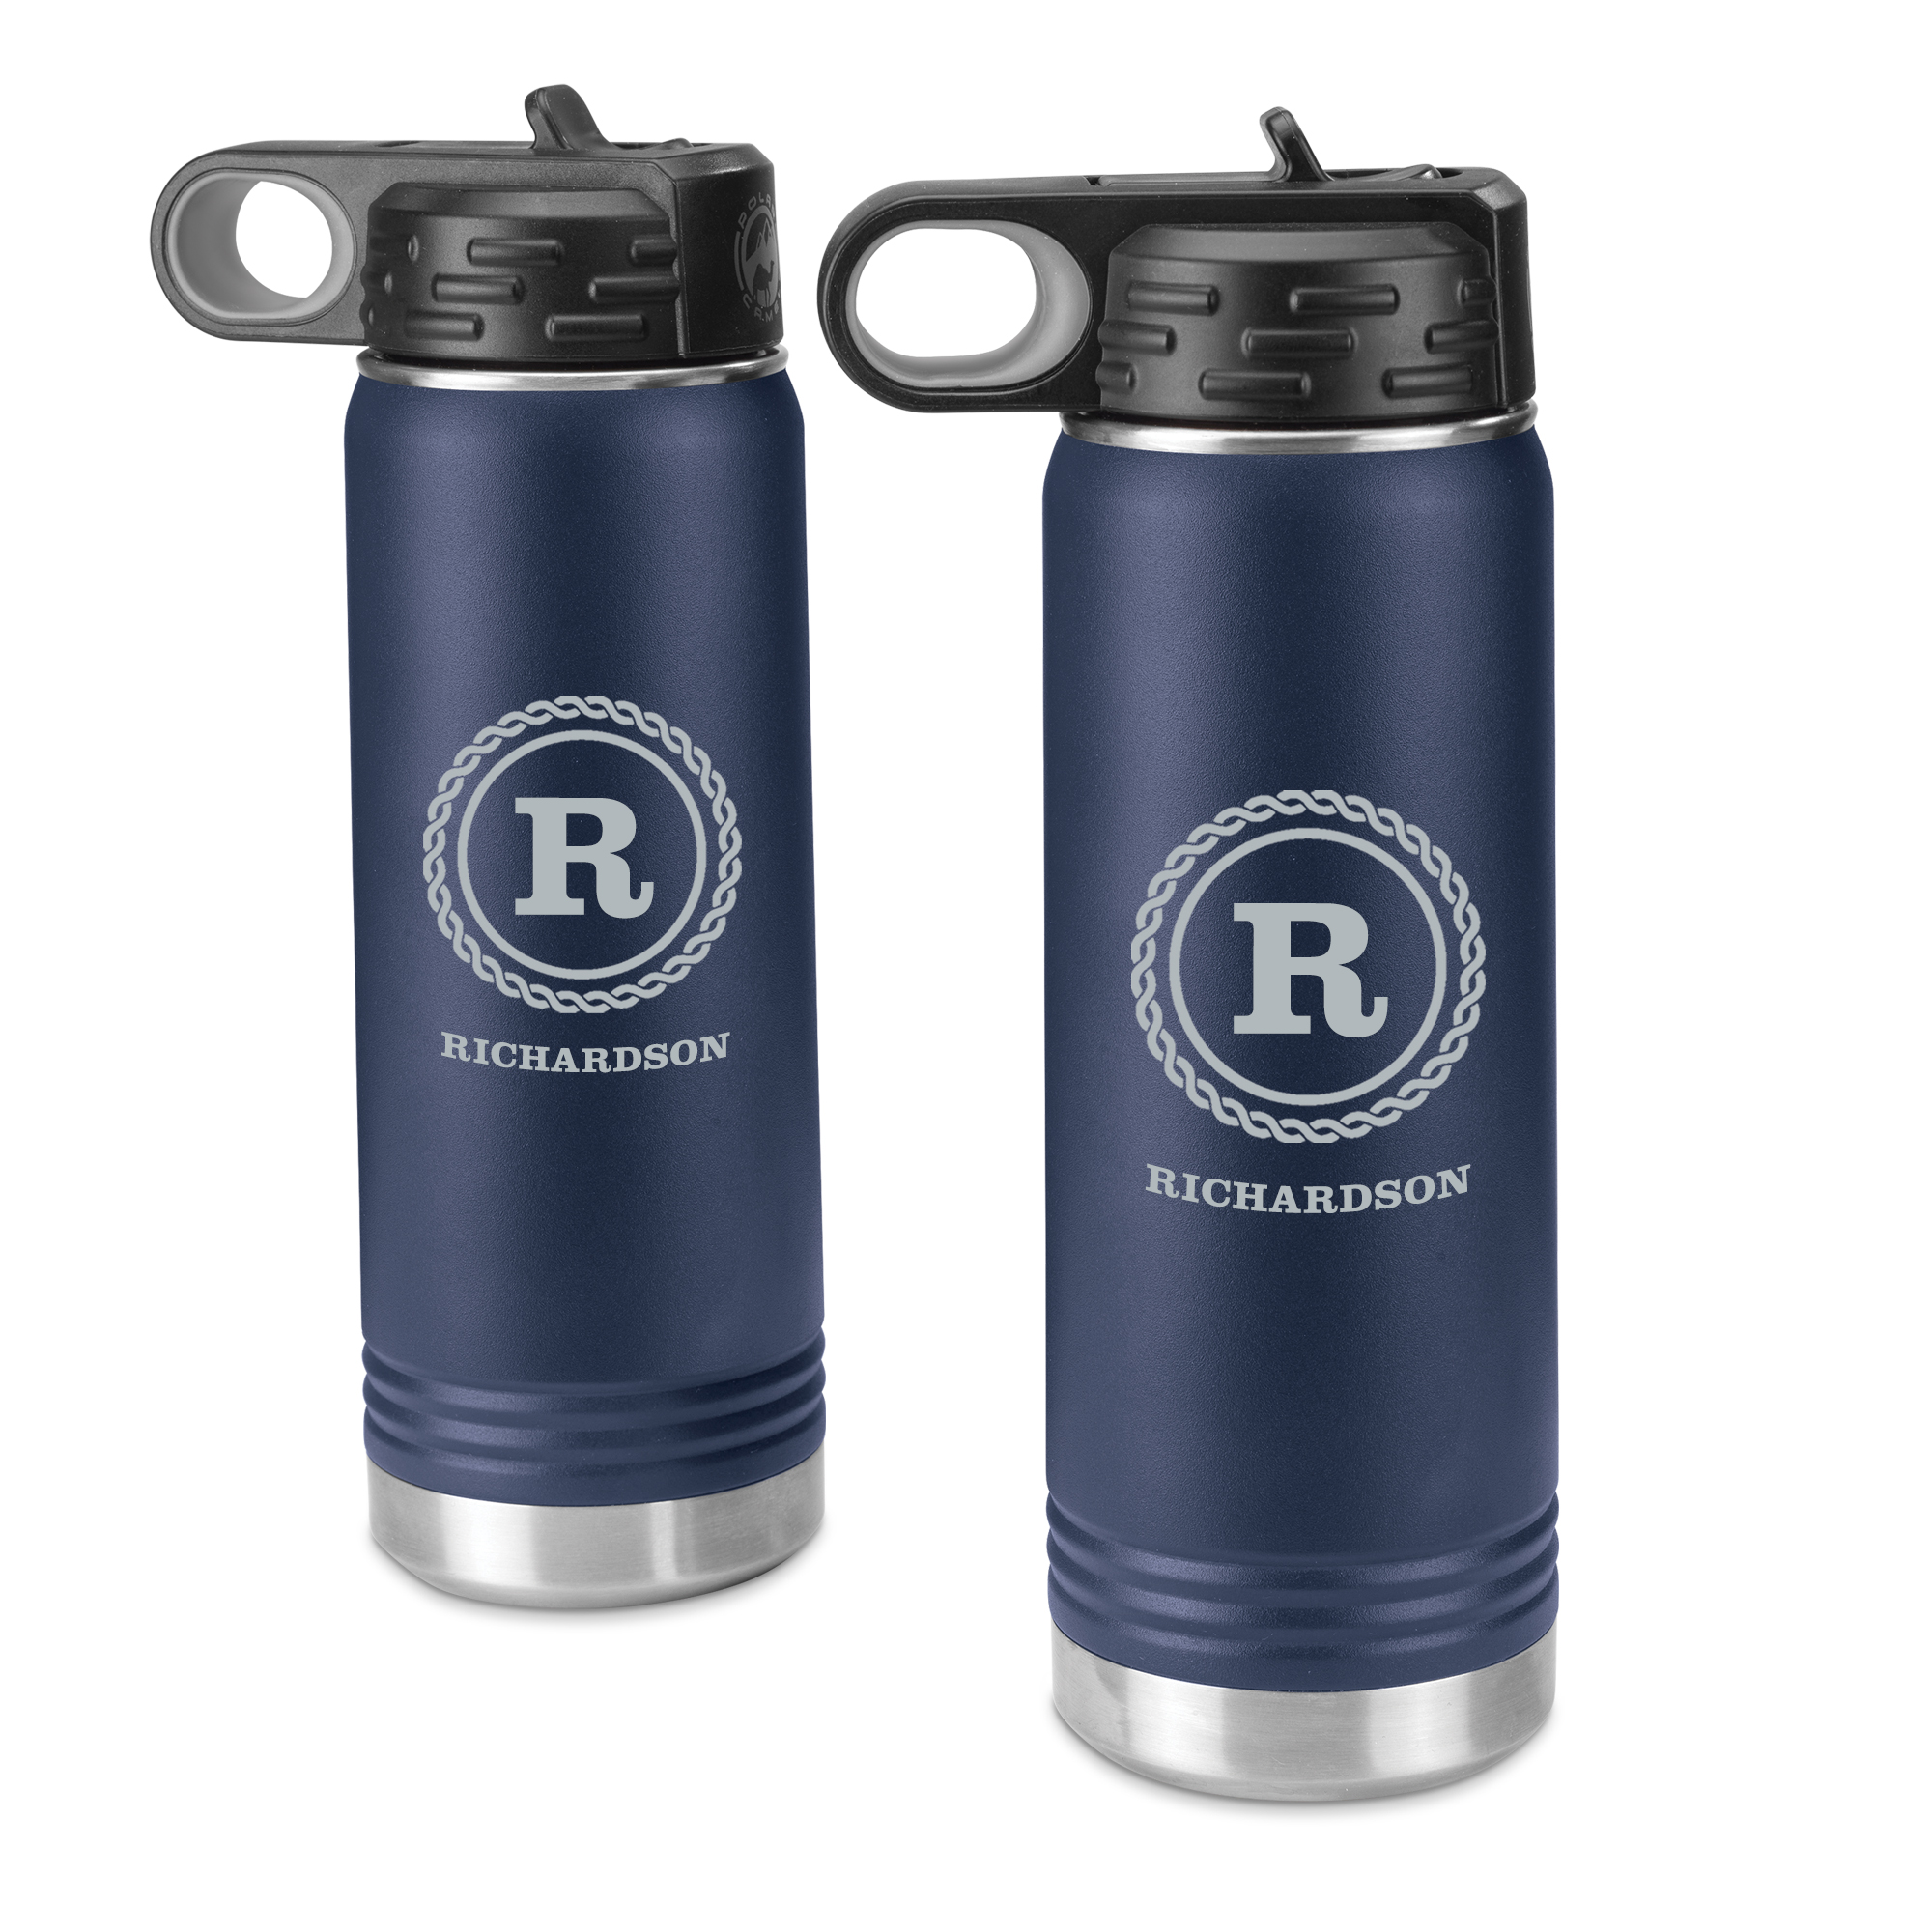 https://www.danburymint.com/on/demandware.static/-/Sites-full-catalog/default/dw92253aae/images/hi-res/The-Personalized-Insulated-Water-Bottle-Duo_11465-0013_a_main.jpg